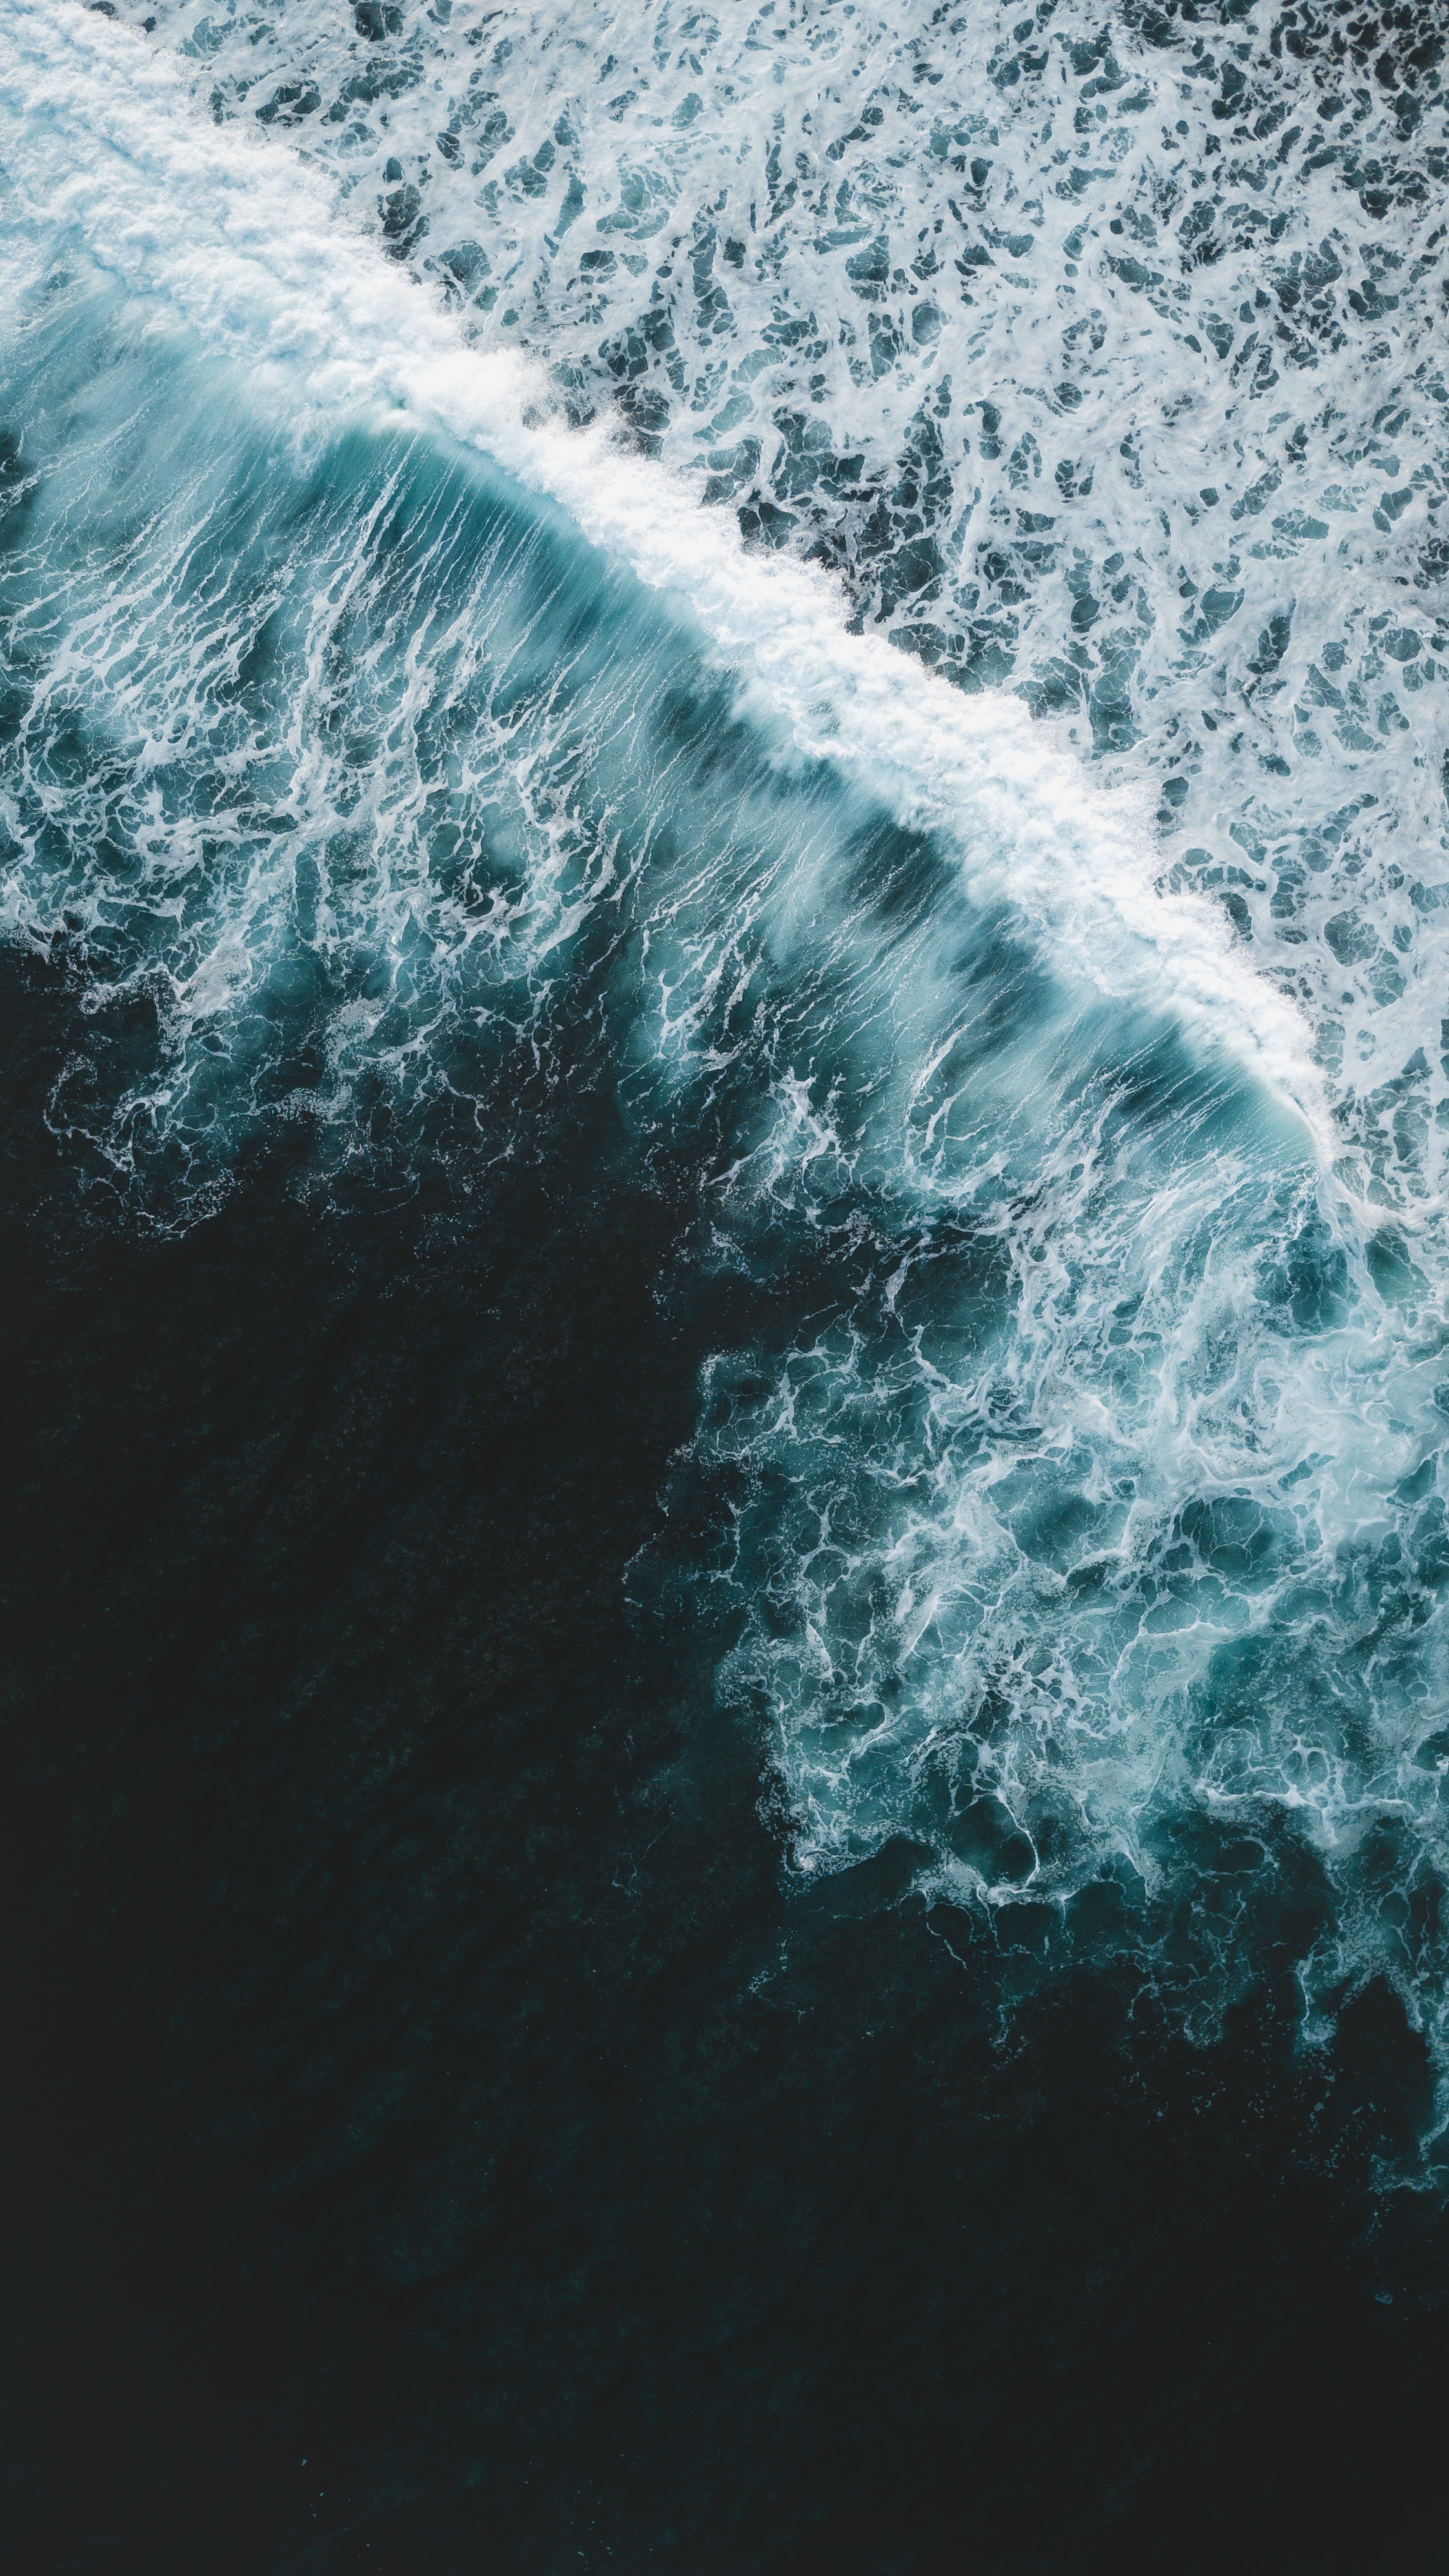 Horizontal Wallpaper ocean, nature, water, waves, view from above, surf